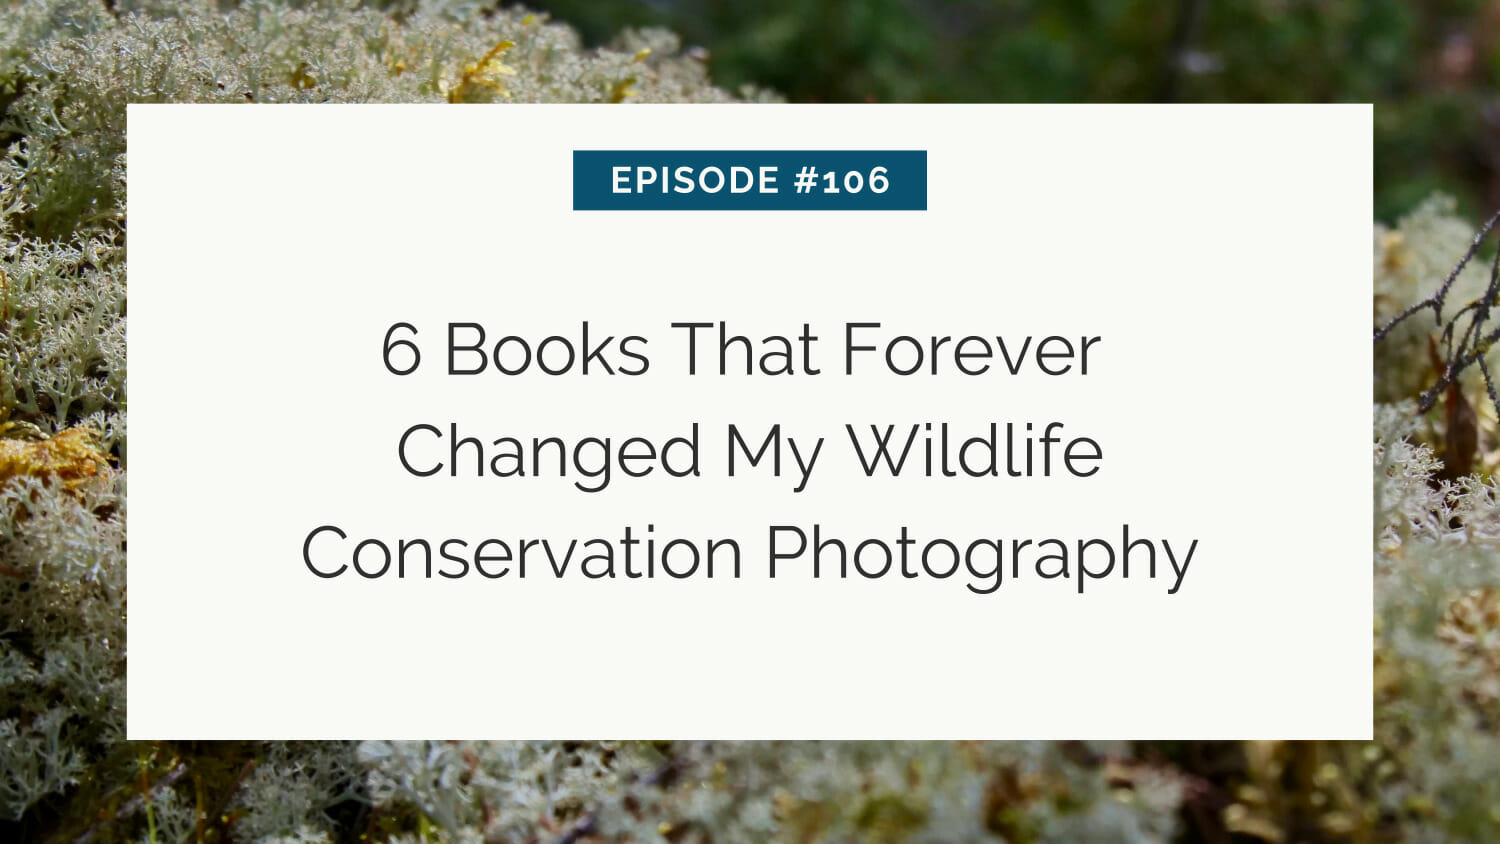 Presentation slide titled "episode #106 - 6 books that forever changed my wildlife conservation photography" with a nature background.